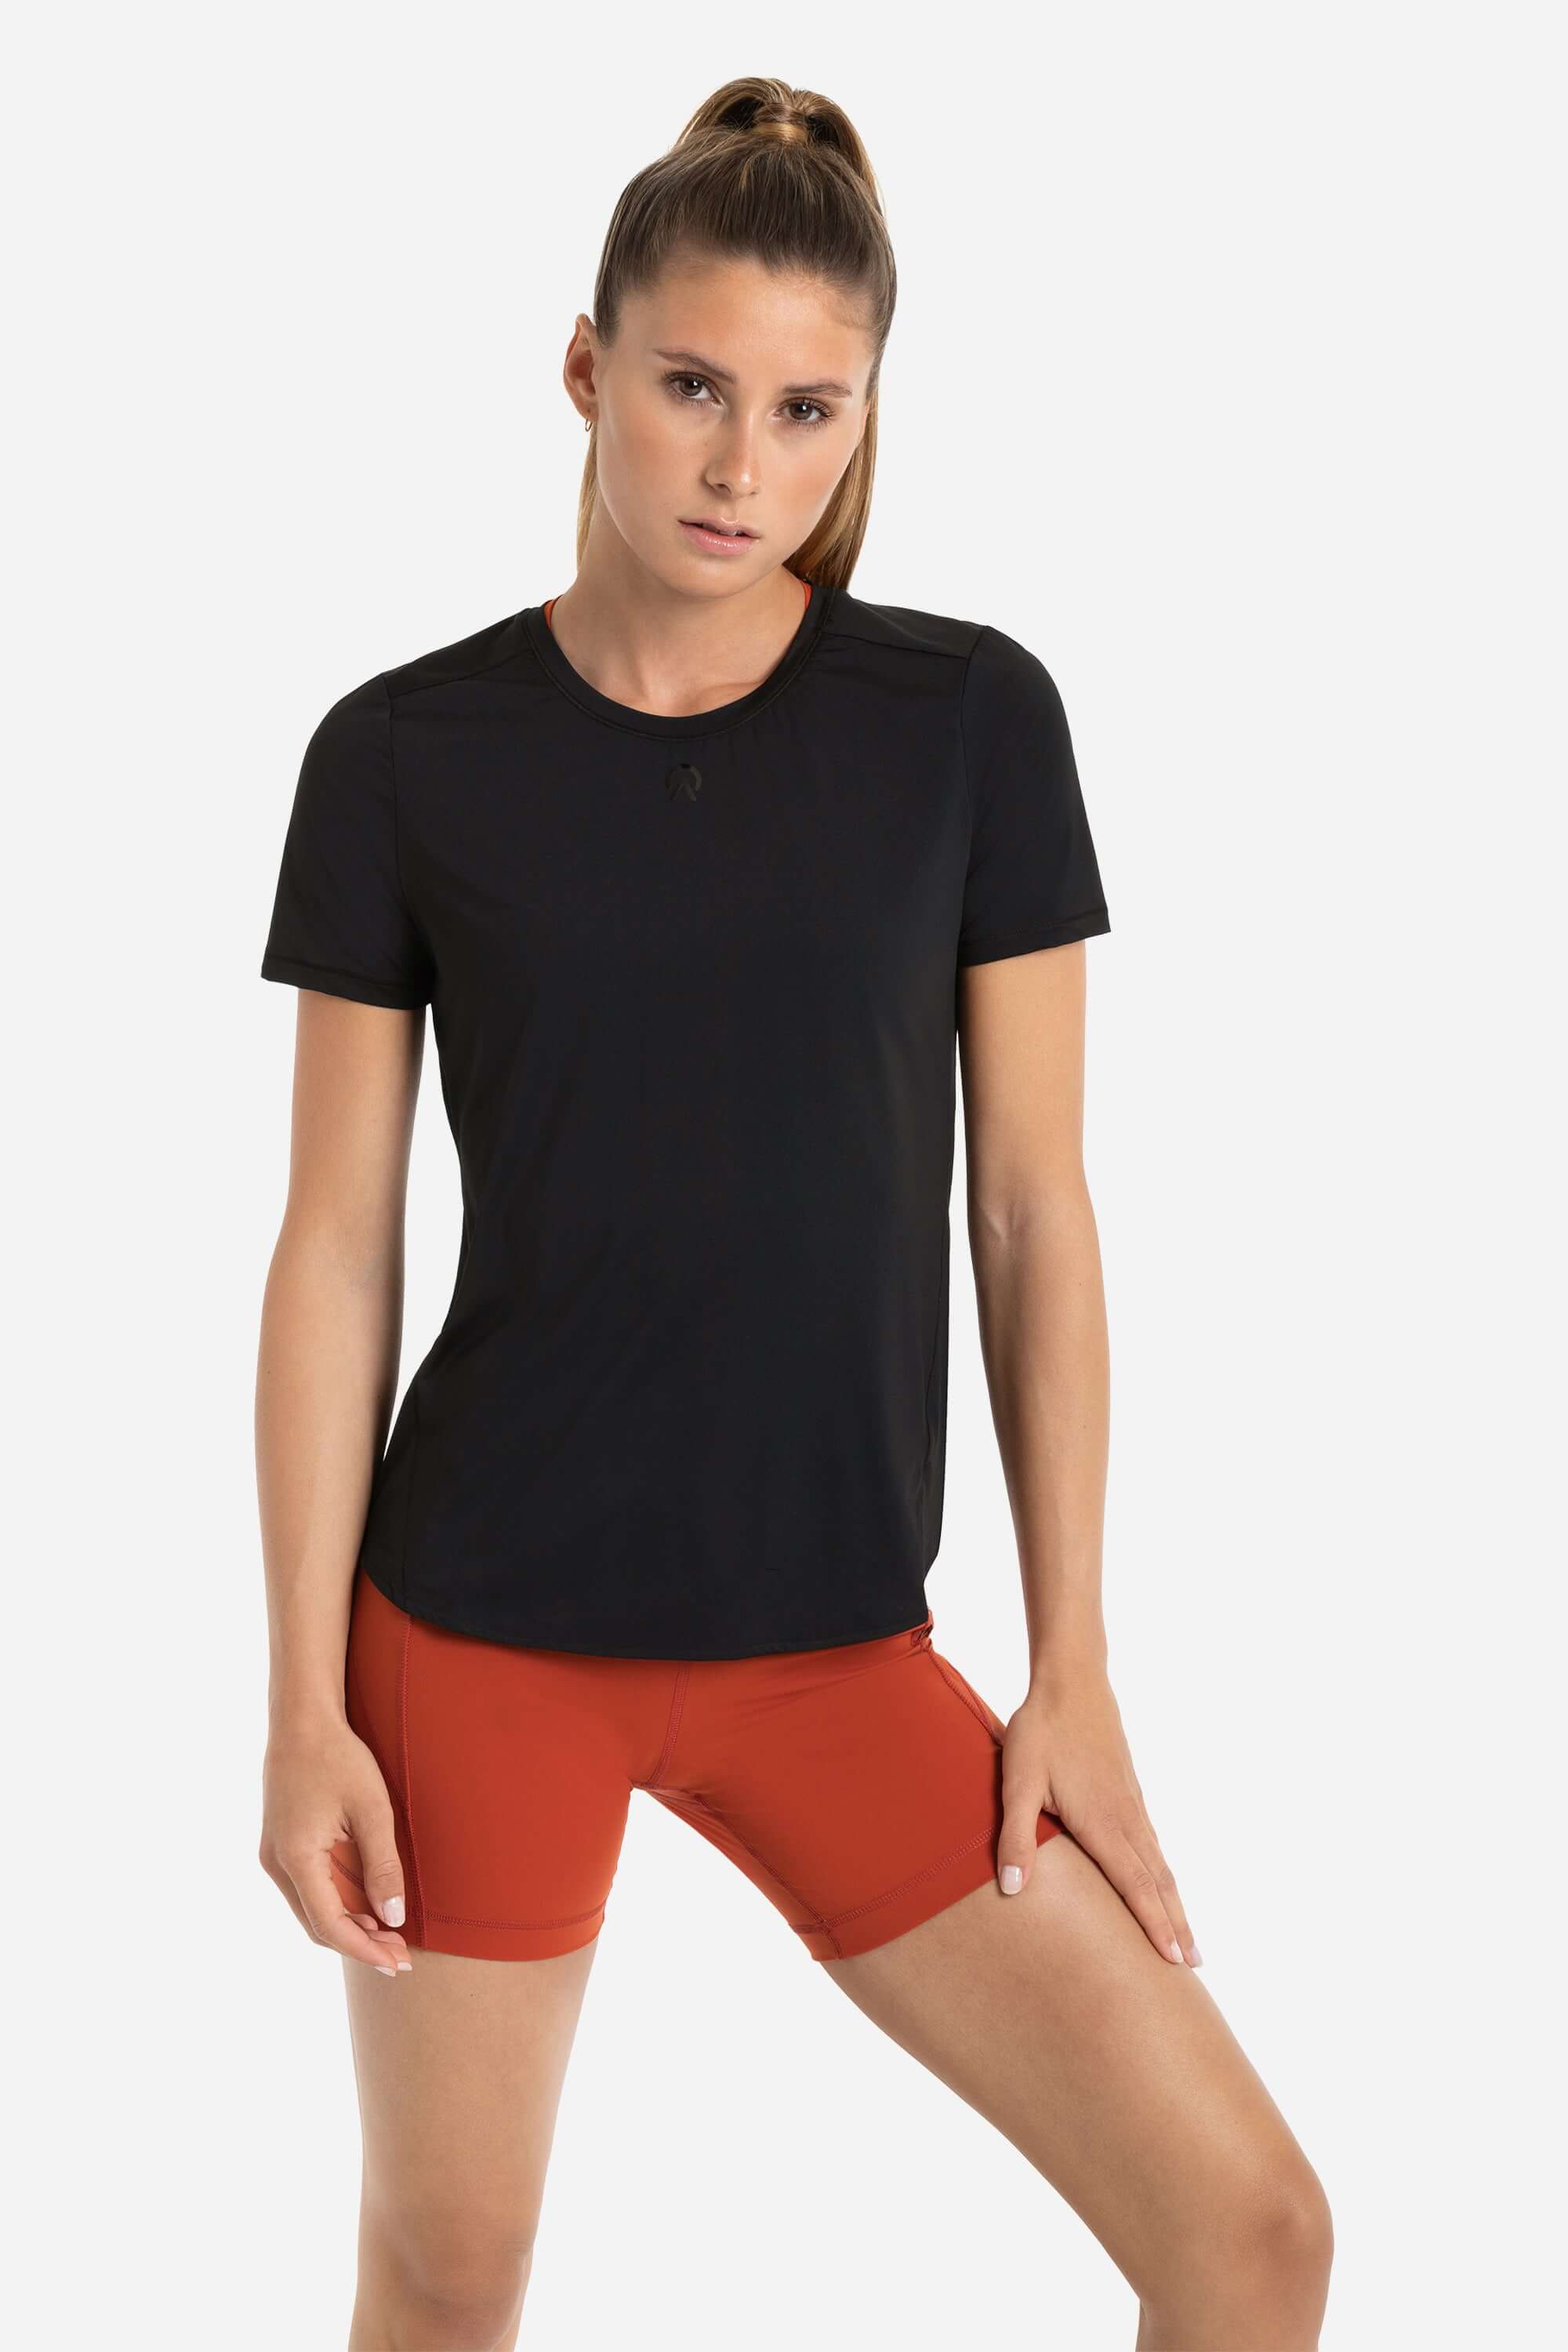 Women in a workout shirt short sleeve in black and short tights in red